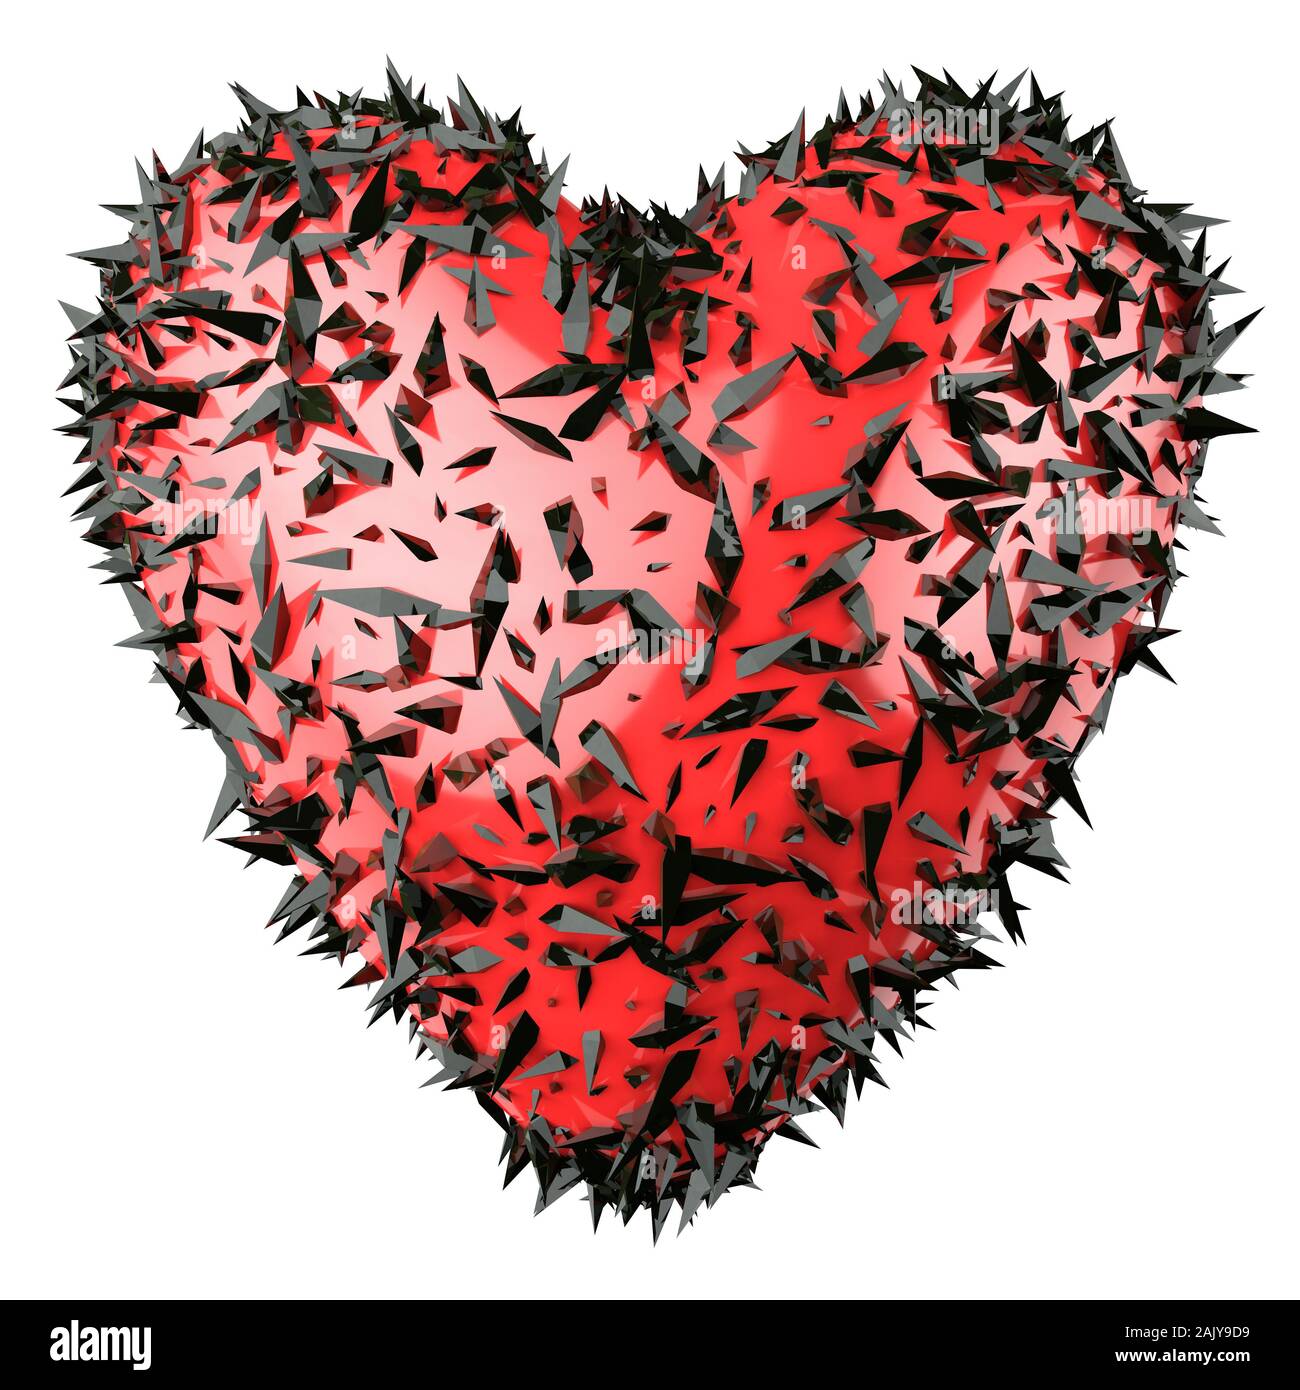 Red heart with black spiky sharp crystals isolated on white background. Symbol for love, romance, hard relationship and passion. Stock Photo